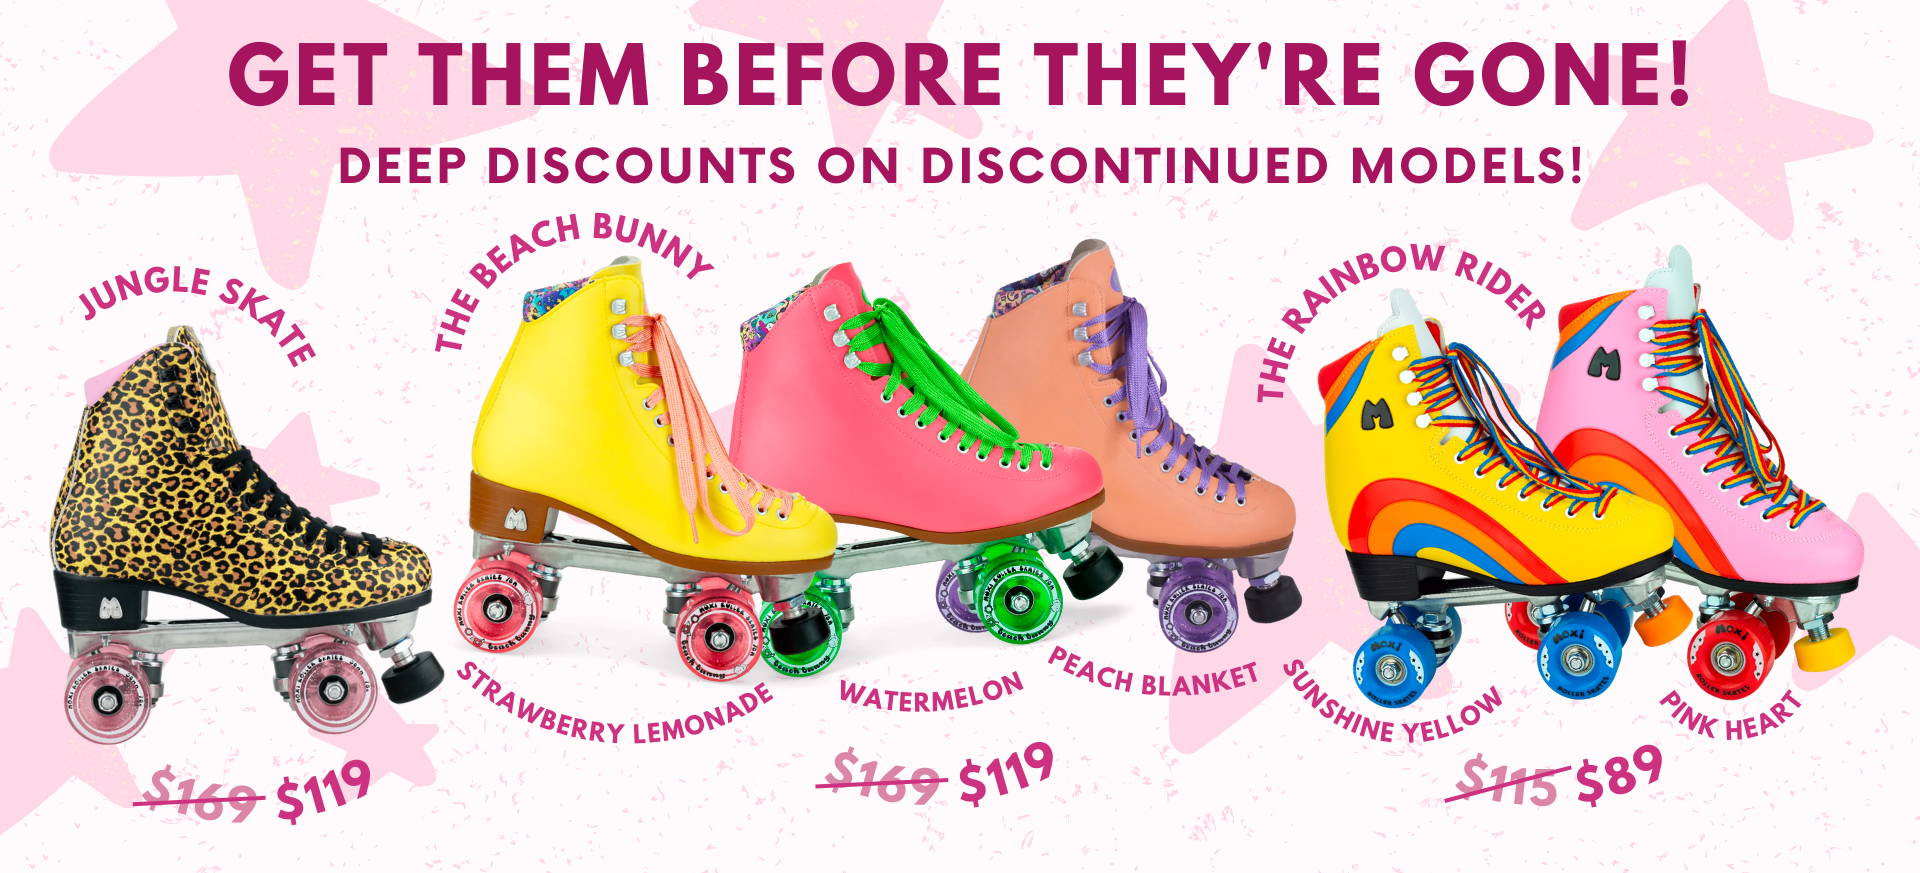 links to discounted models of skates